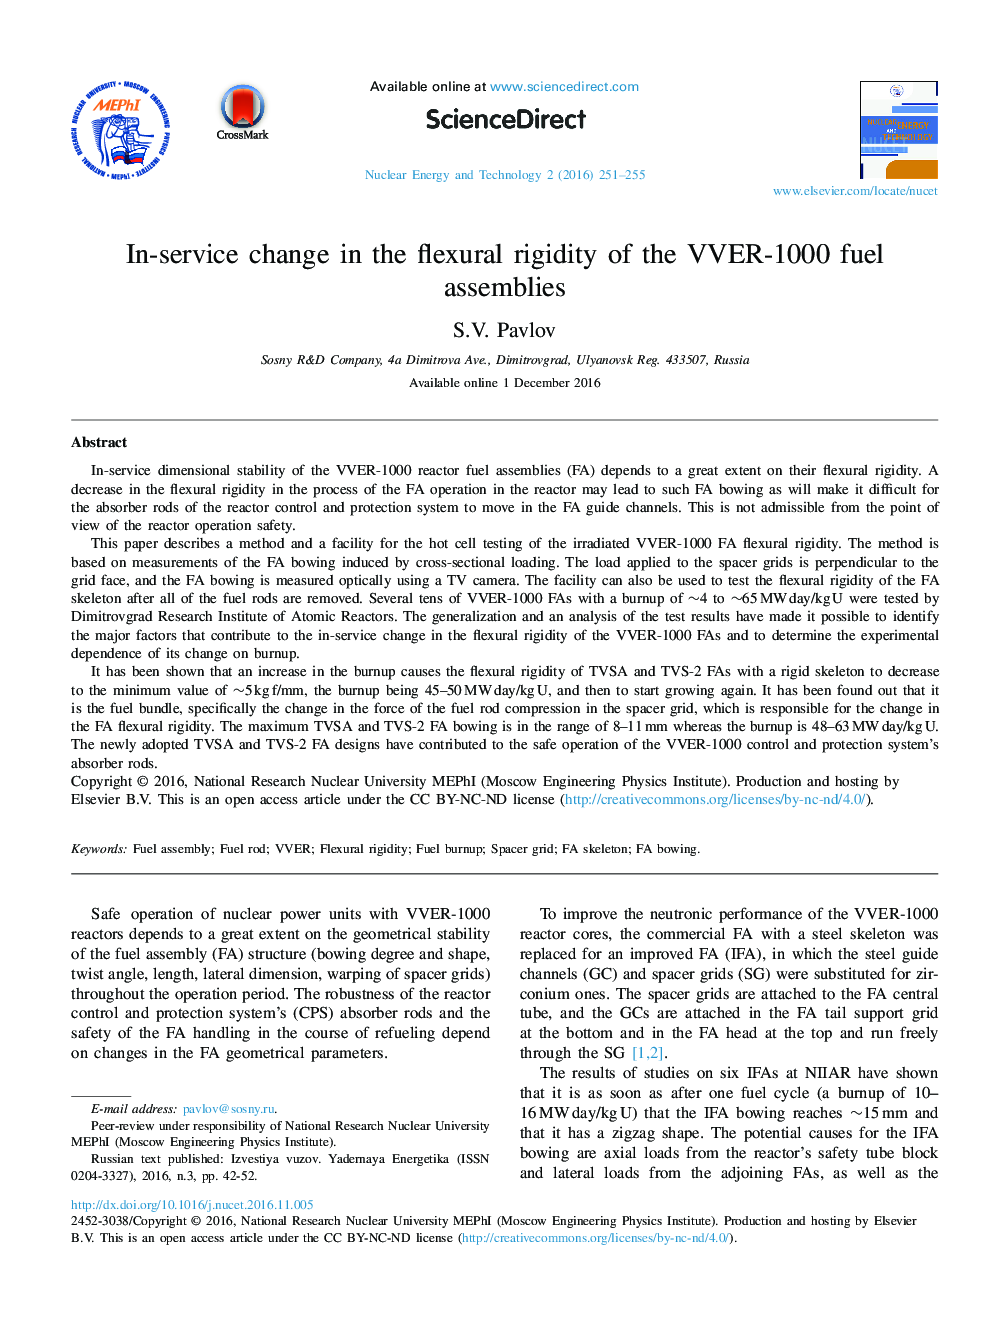 In-service change in the flexural rigidity of the VVER-1000 fuel assemblies